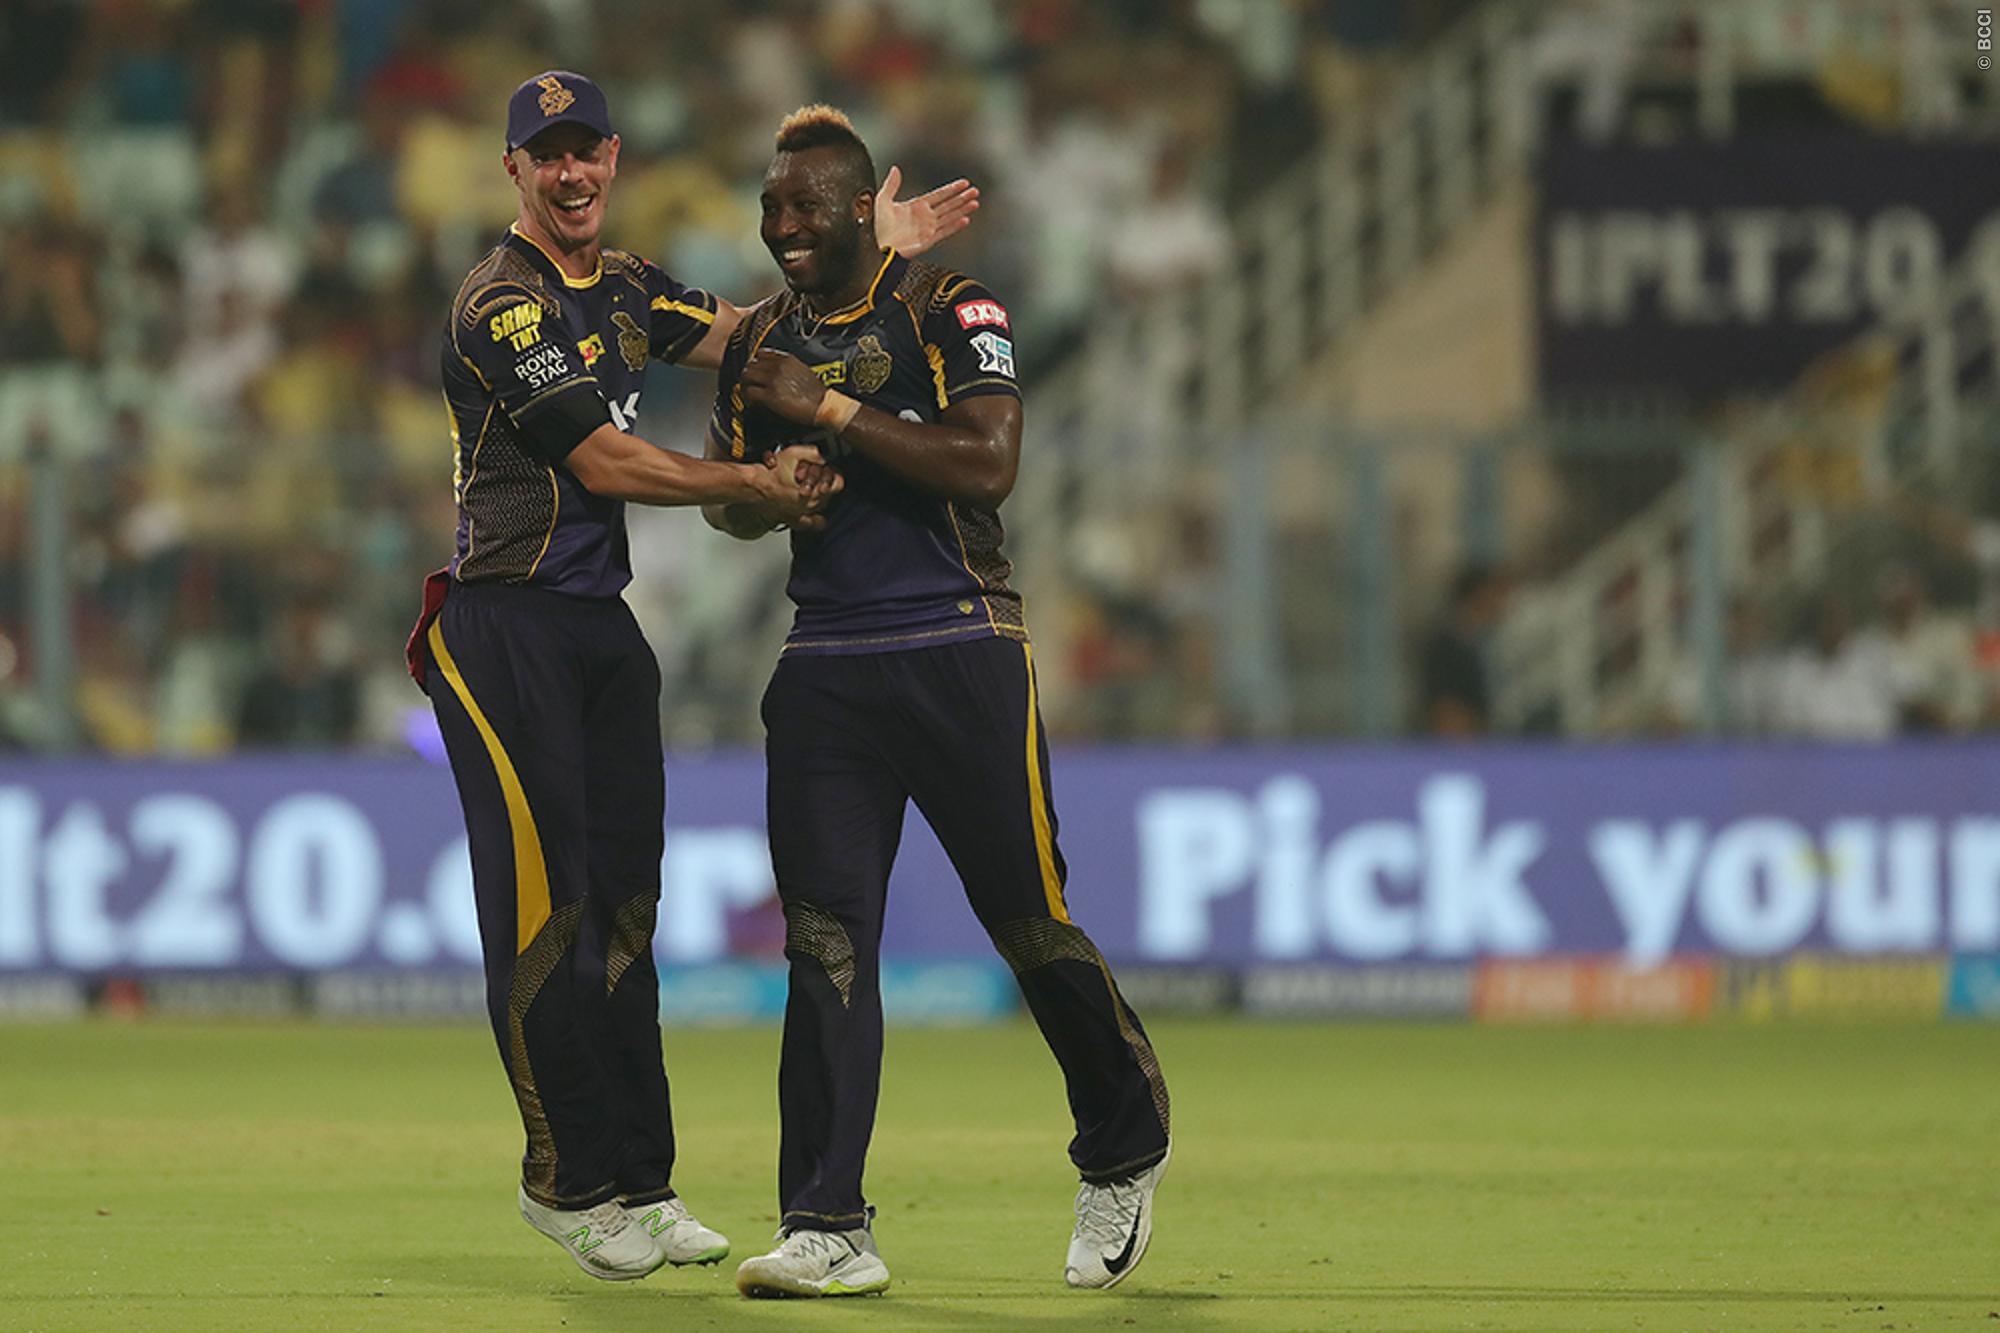 IPL 2018 | Talking Points - The Andre Russell show and Rishabh Pant’s big problem